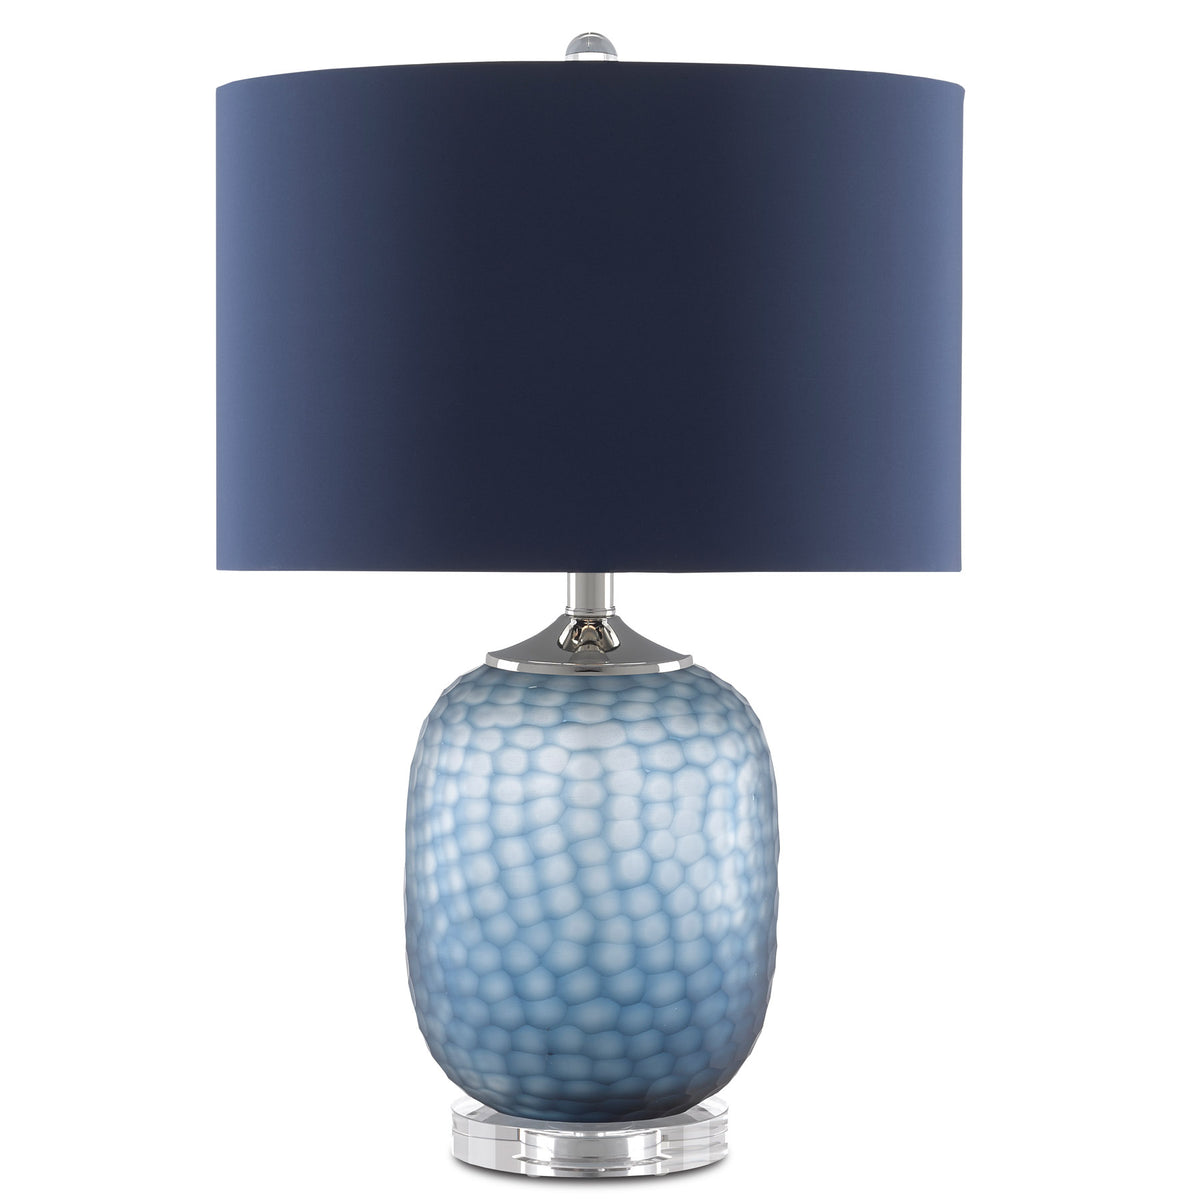 Ionian Table Lamp